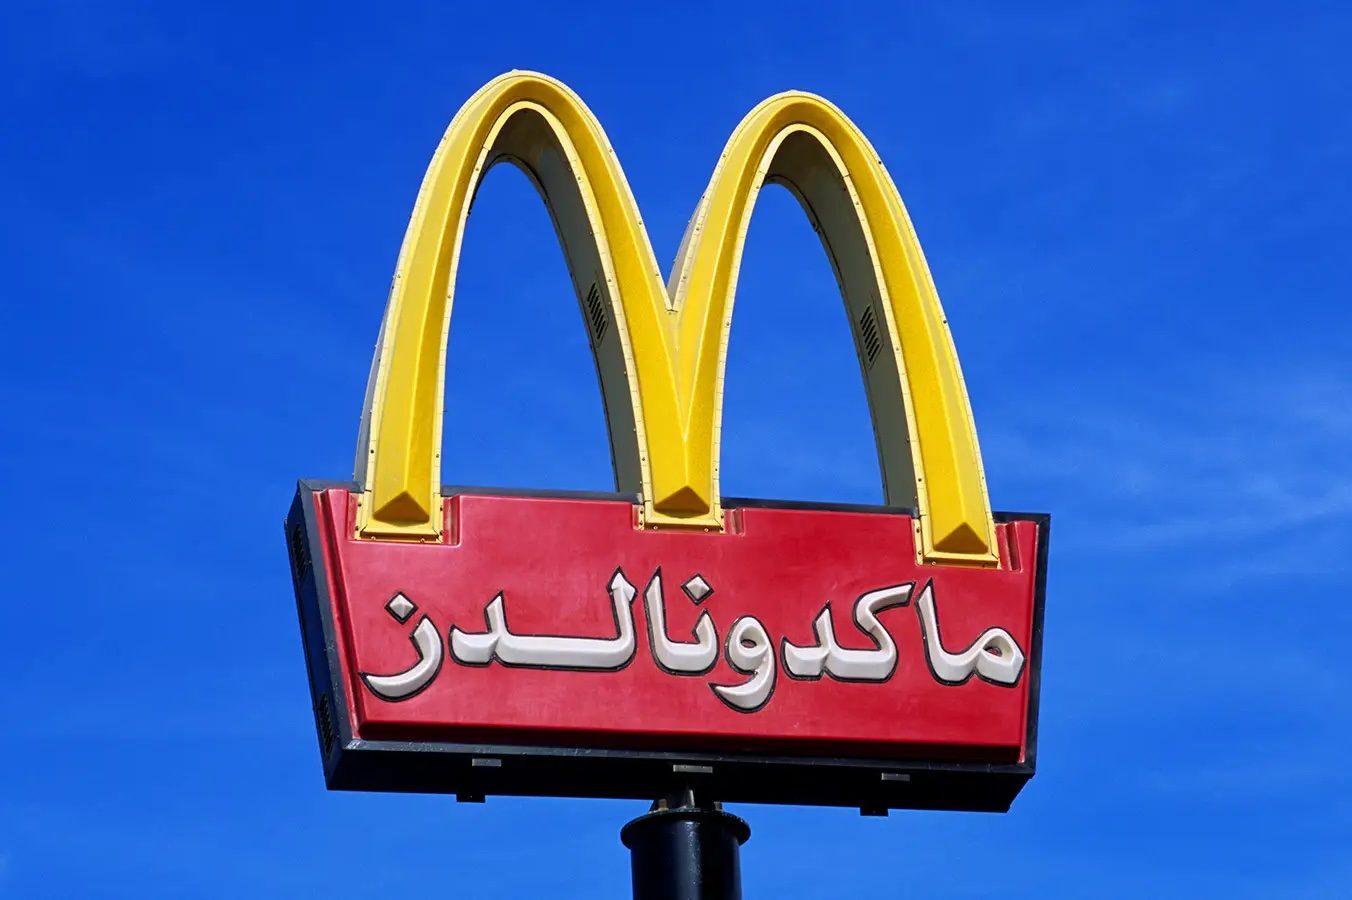 Photo of an Indian fast food sign.